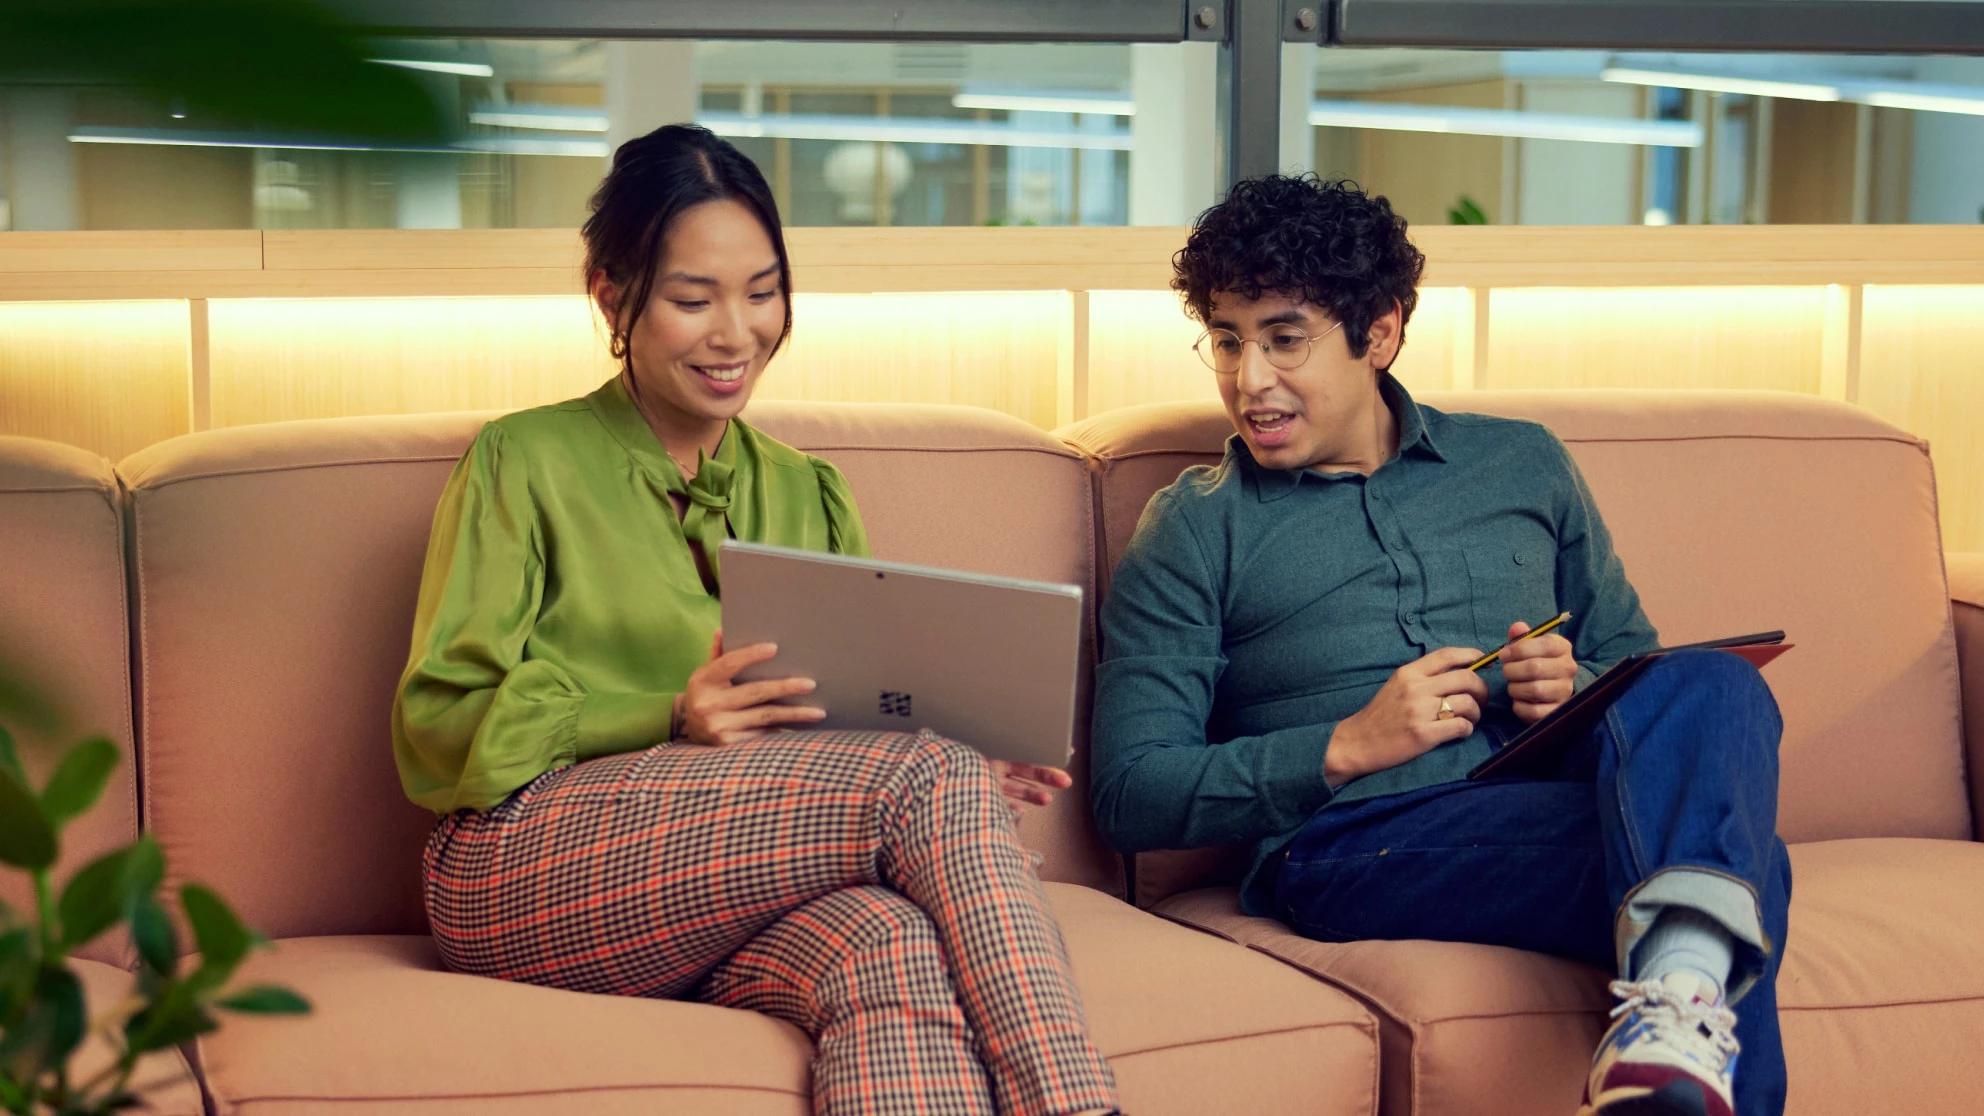 Two people on a sofa viewing a tablet